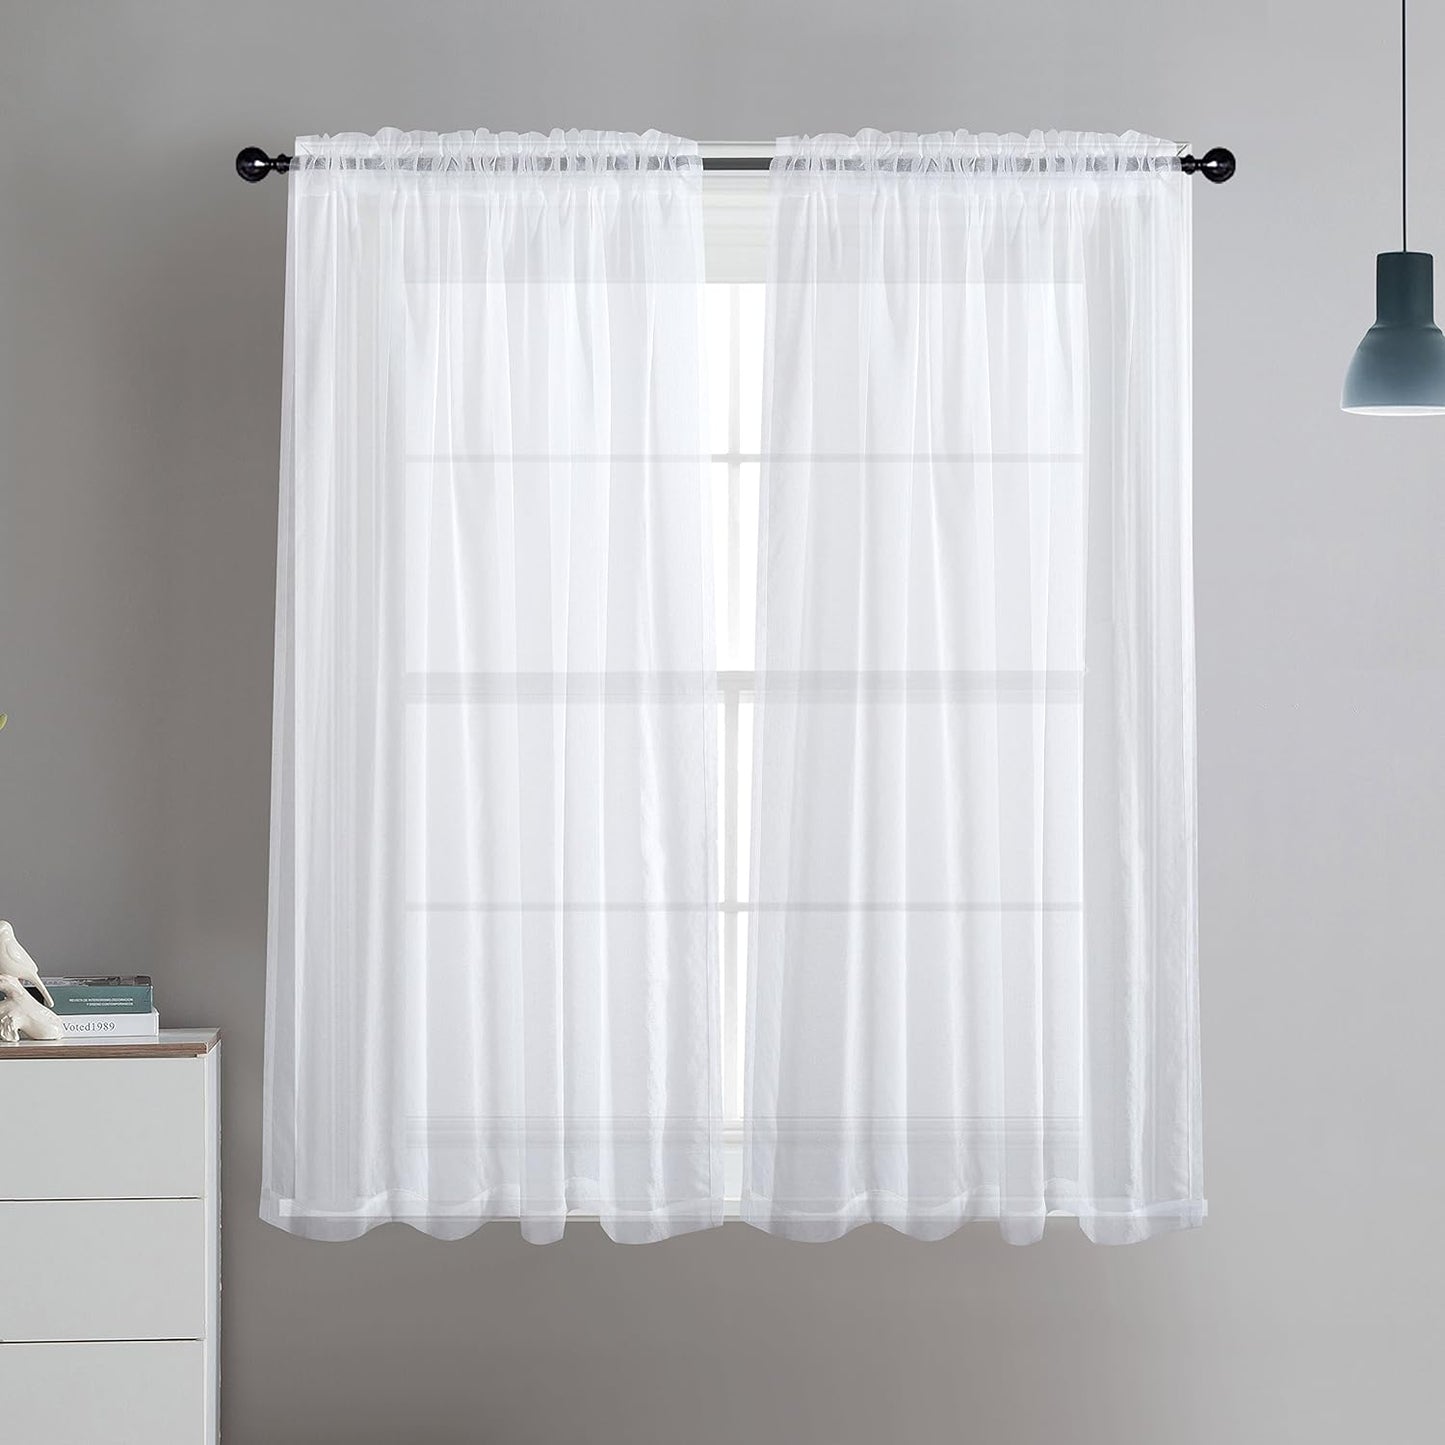 Dreaming Casa Solid Sheer Curtains White Rod Pocket Voile Draperies 96 Inches Long for Living Room 42" W X 96" L 2 Panels  Dreaming Casa White 2 X (60"W X 96"L) 